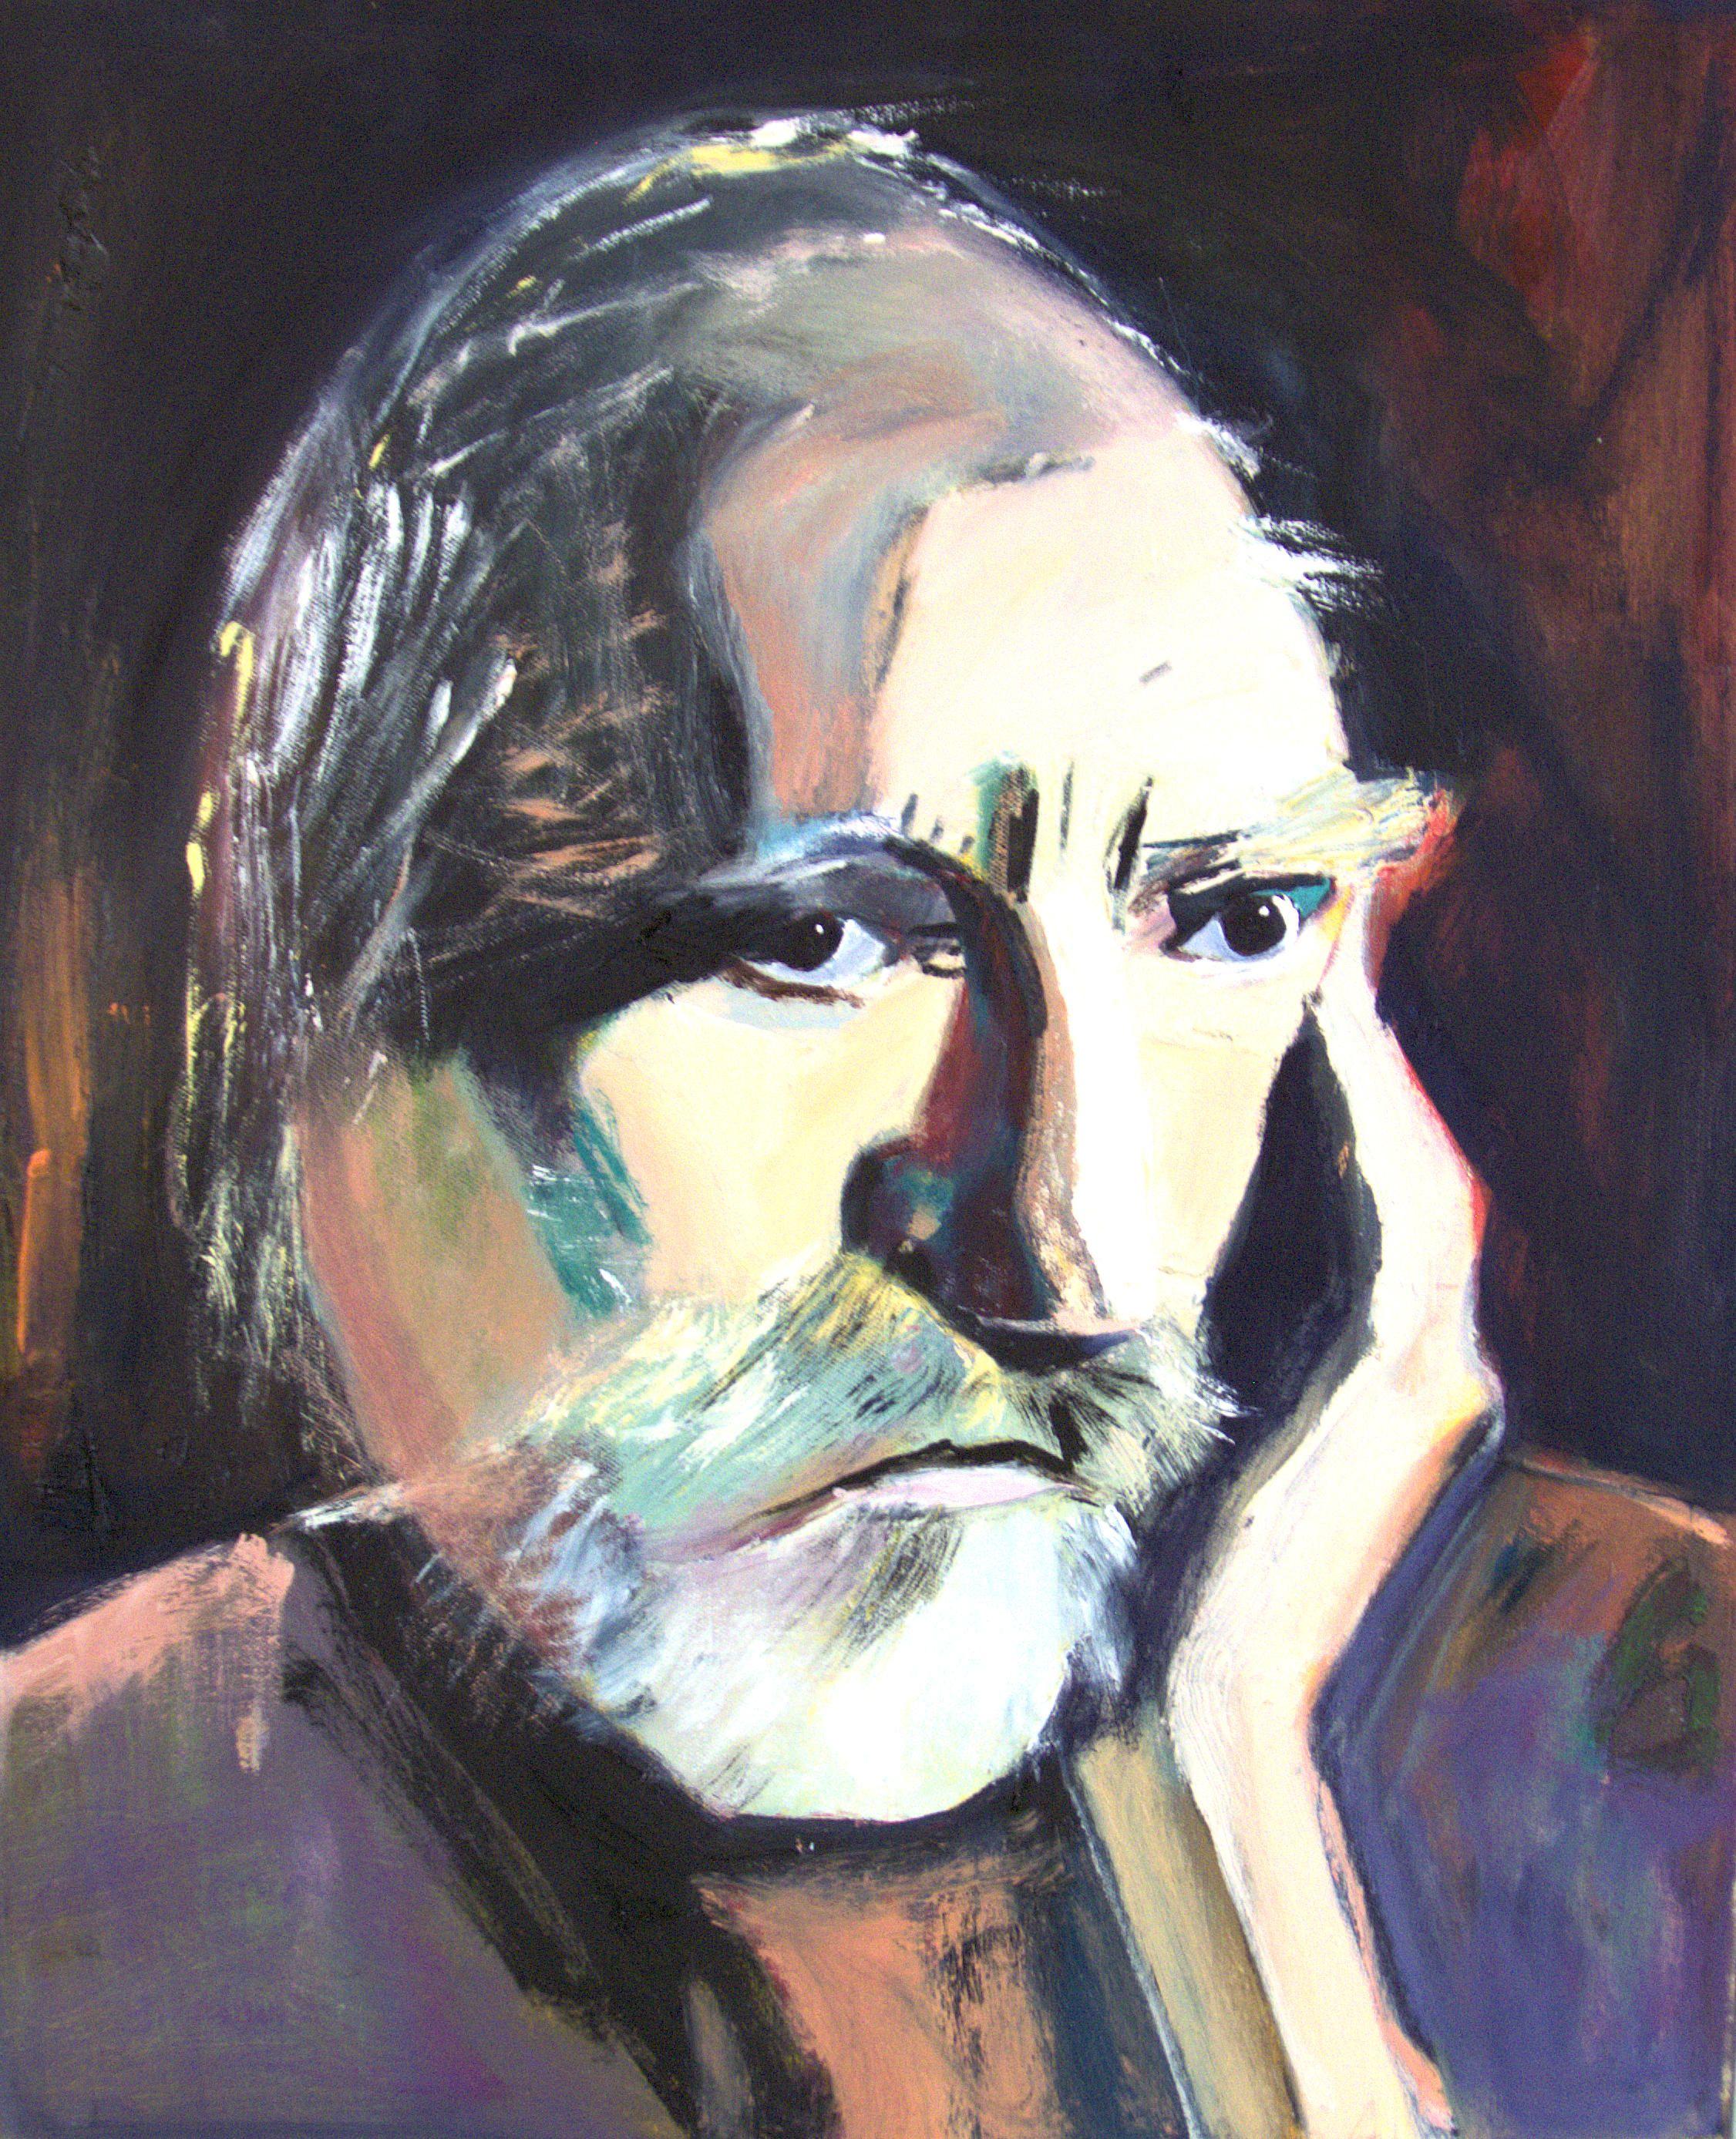 OLD MAN, Painting, Oil on Canvas